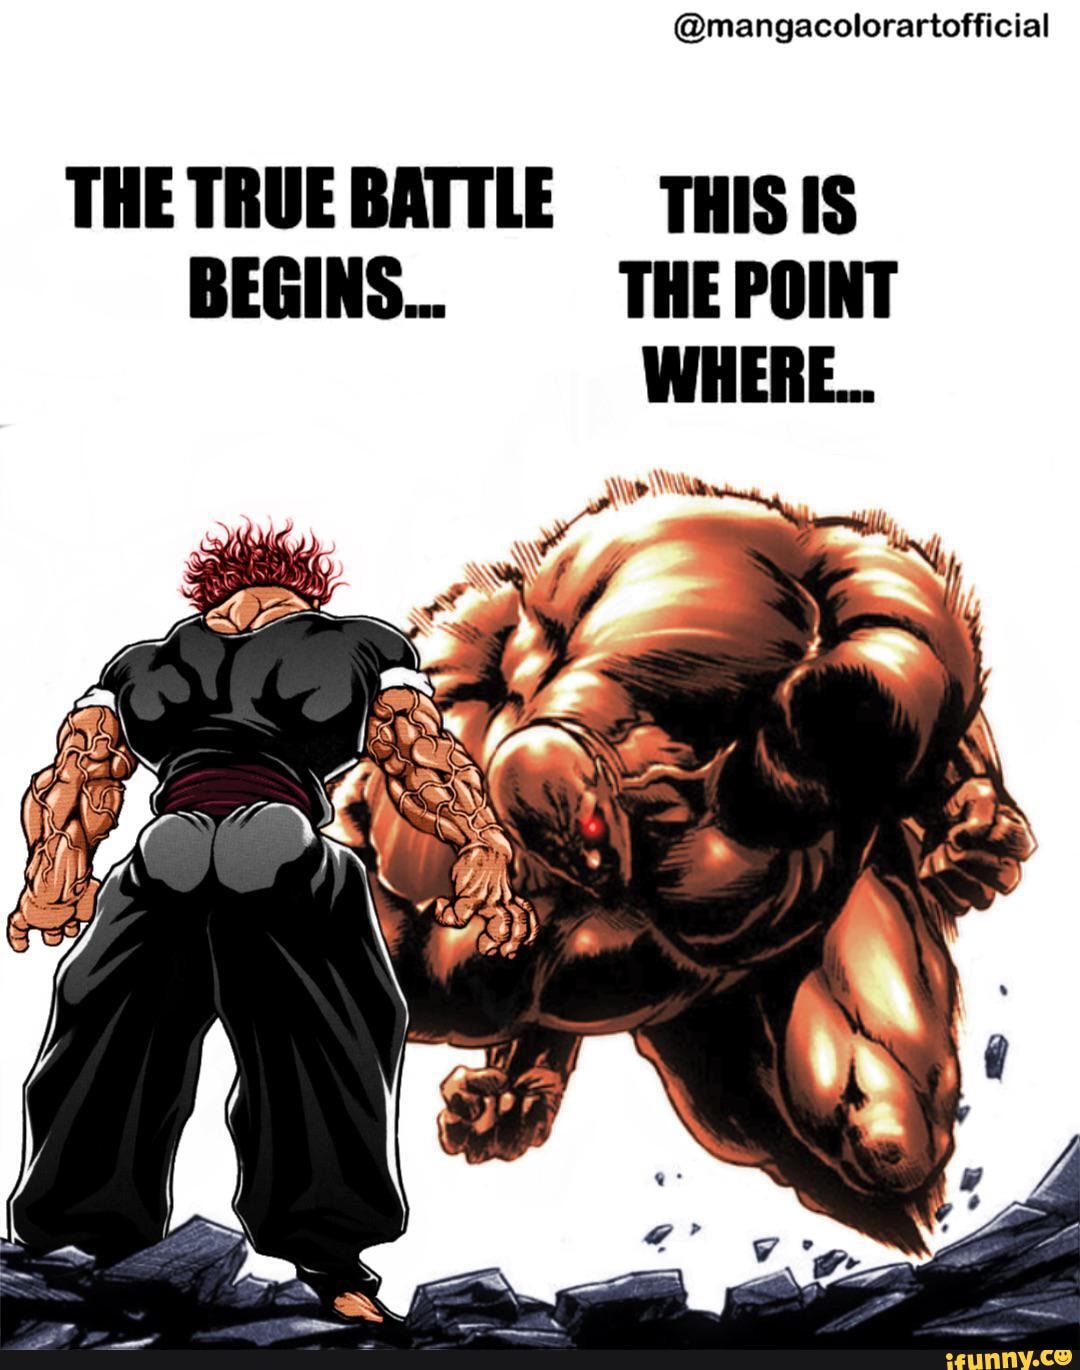 What If Baki Hanma Fought Against King? by Fatal-Terry on DeviantArt